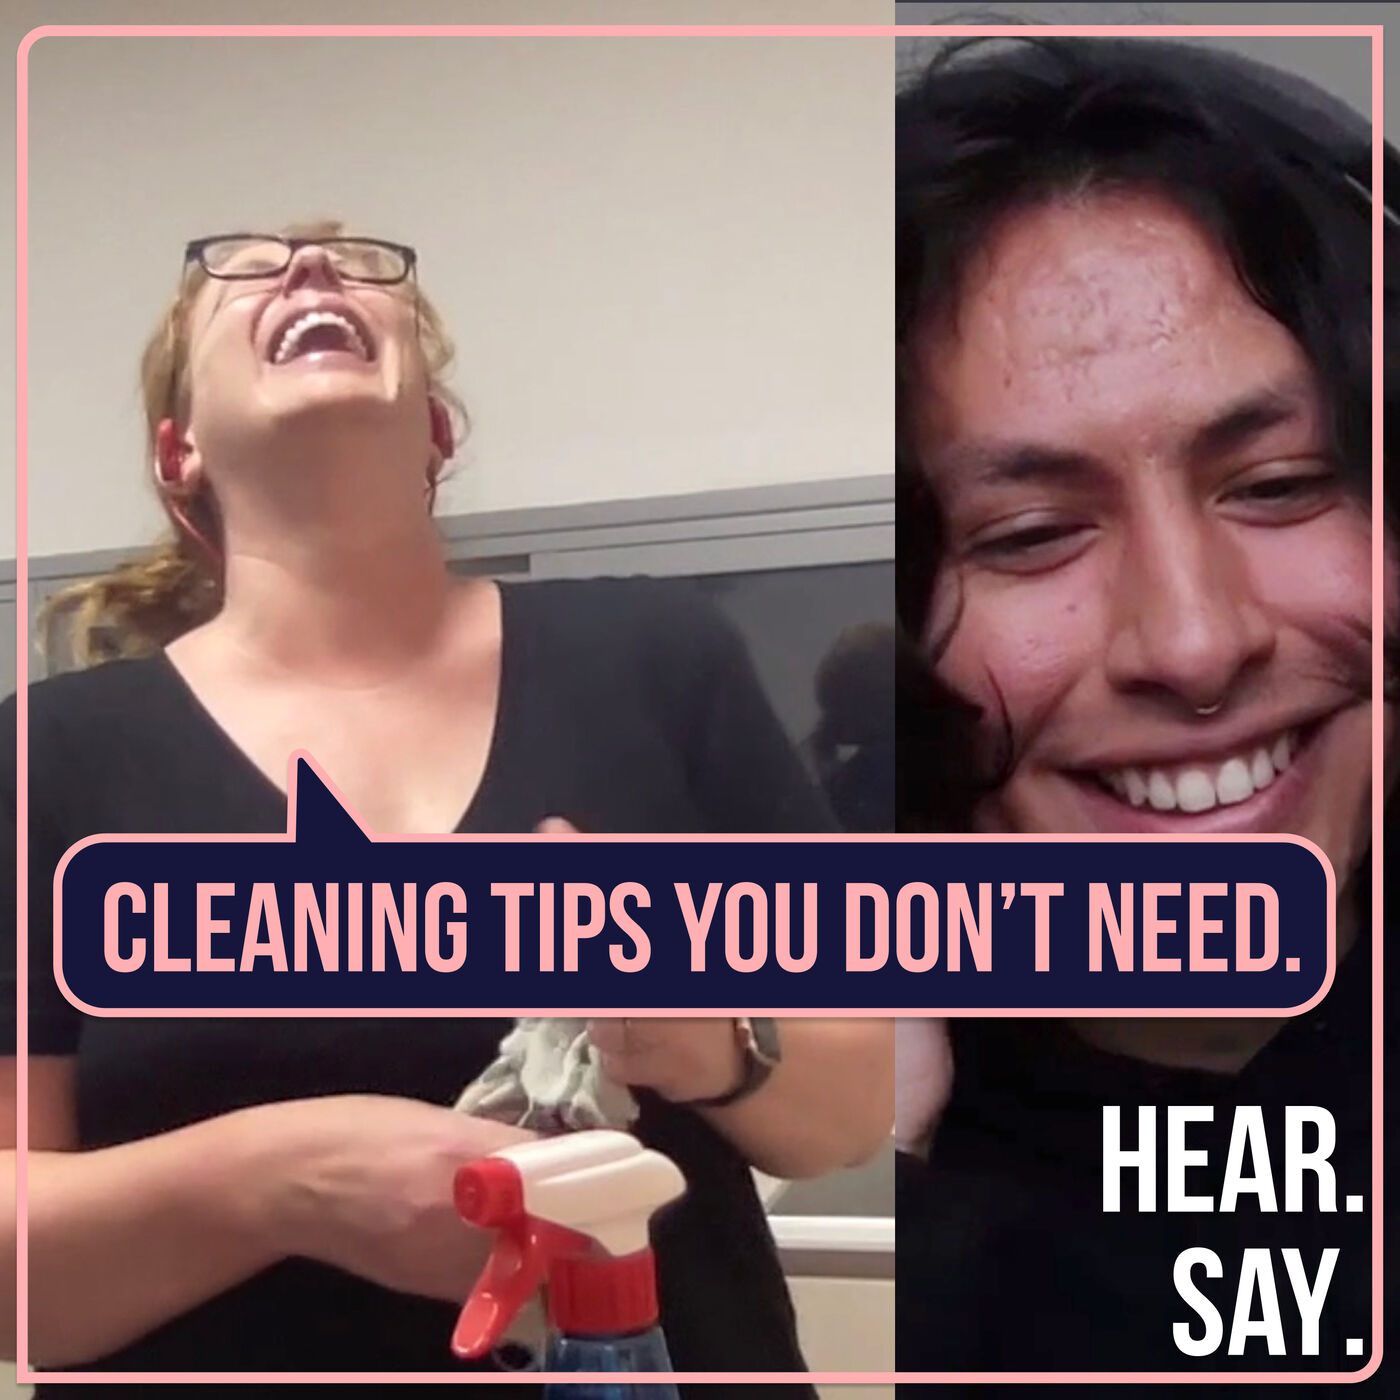 Here, There and Everywhere: Diane's on the Road with Her Cleaning, Kitchen, and Beuaty Tips You Didn't Ask For.